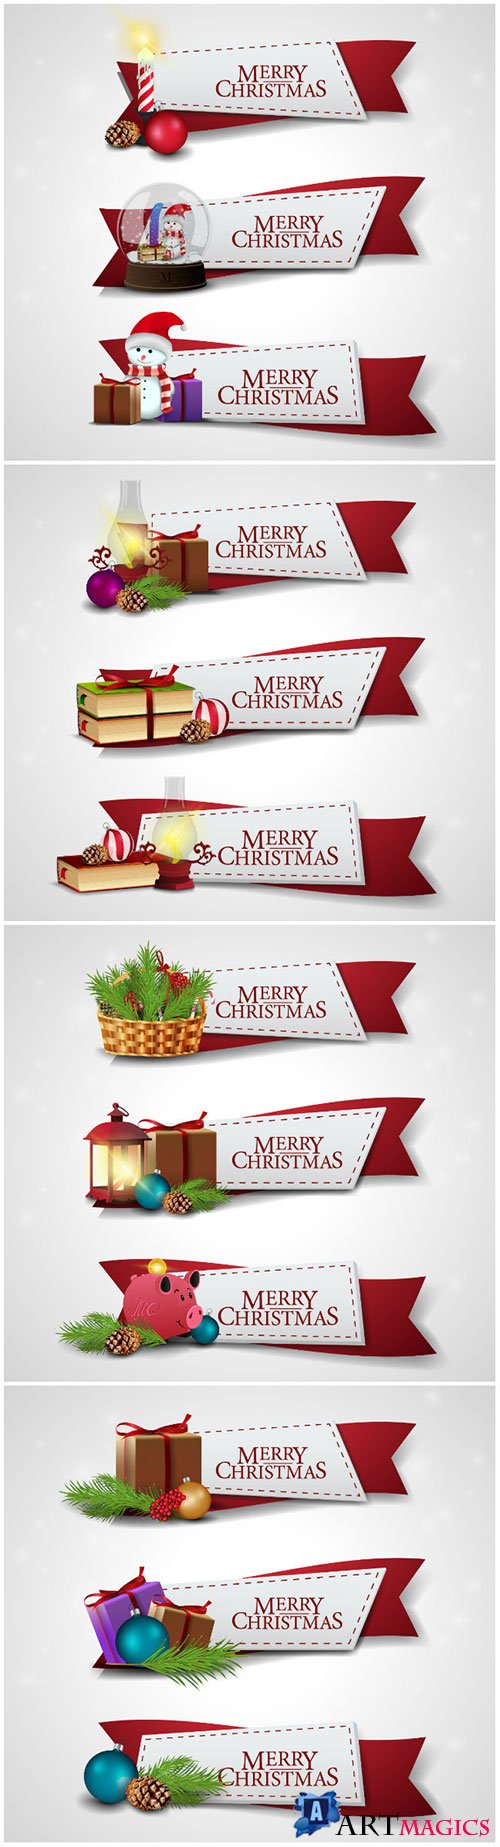 Christmas vector ribbons with cartoon Christmas icons